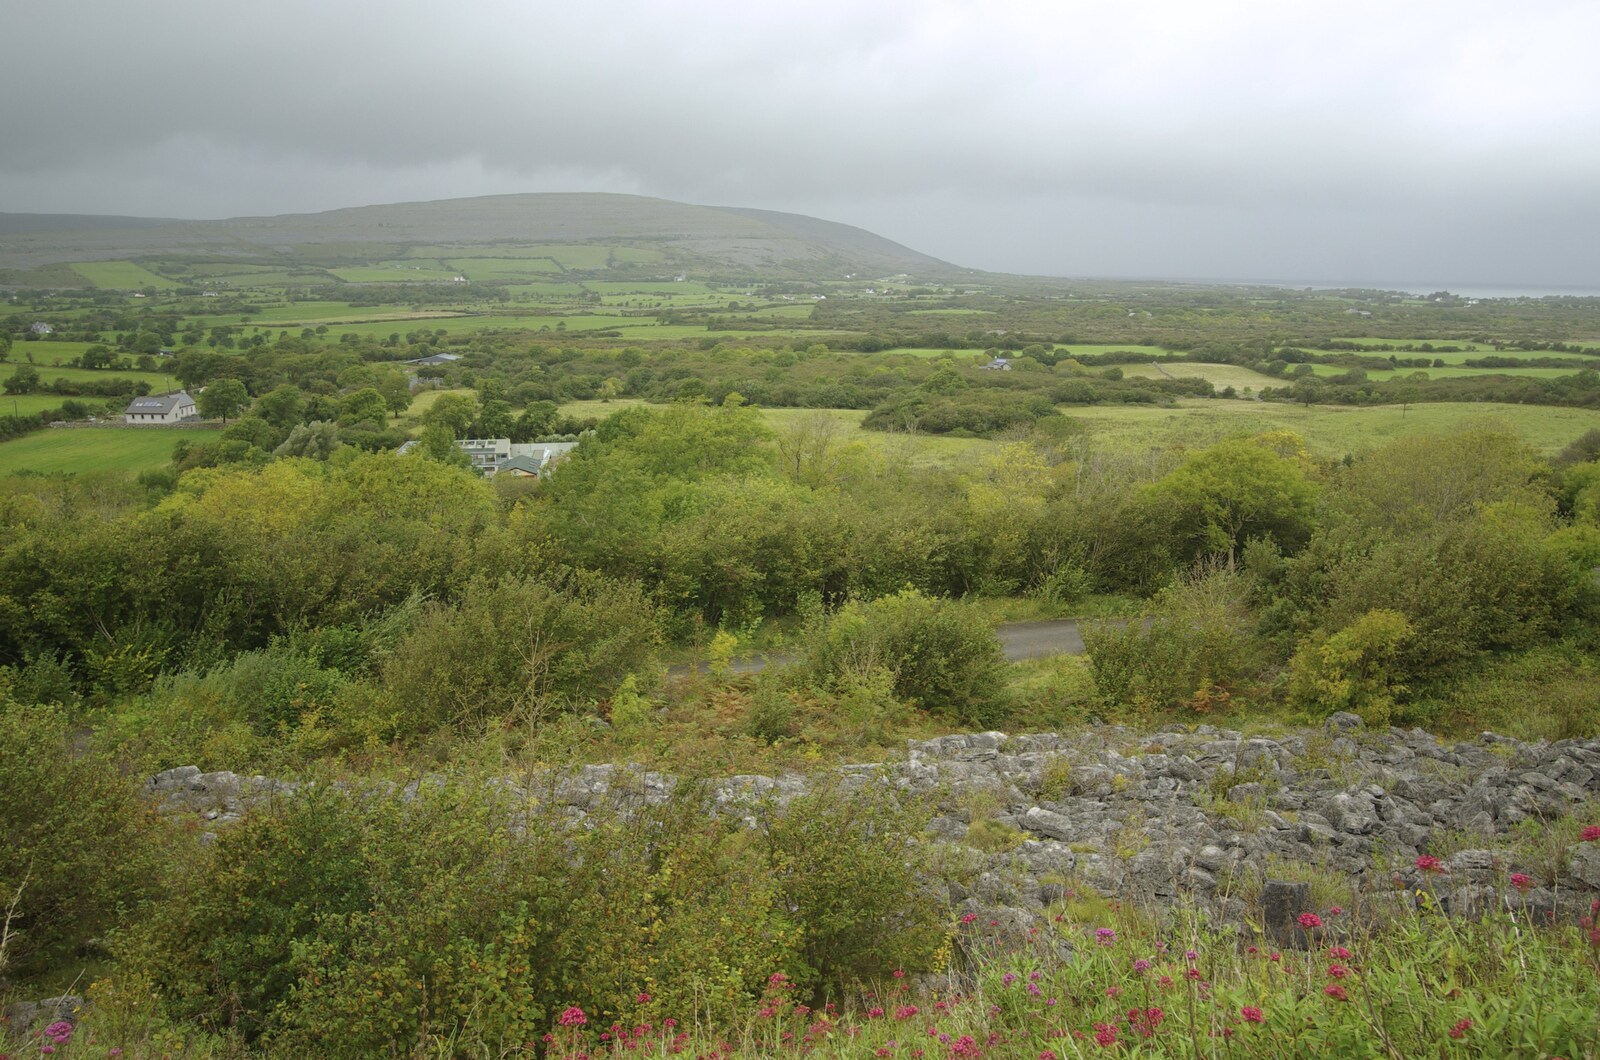 Kilkee to Galway, Connacht, Ireland - 23rd September 2007: A drizzly view of the Burren